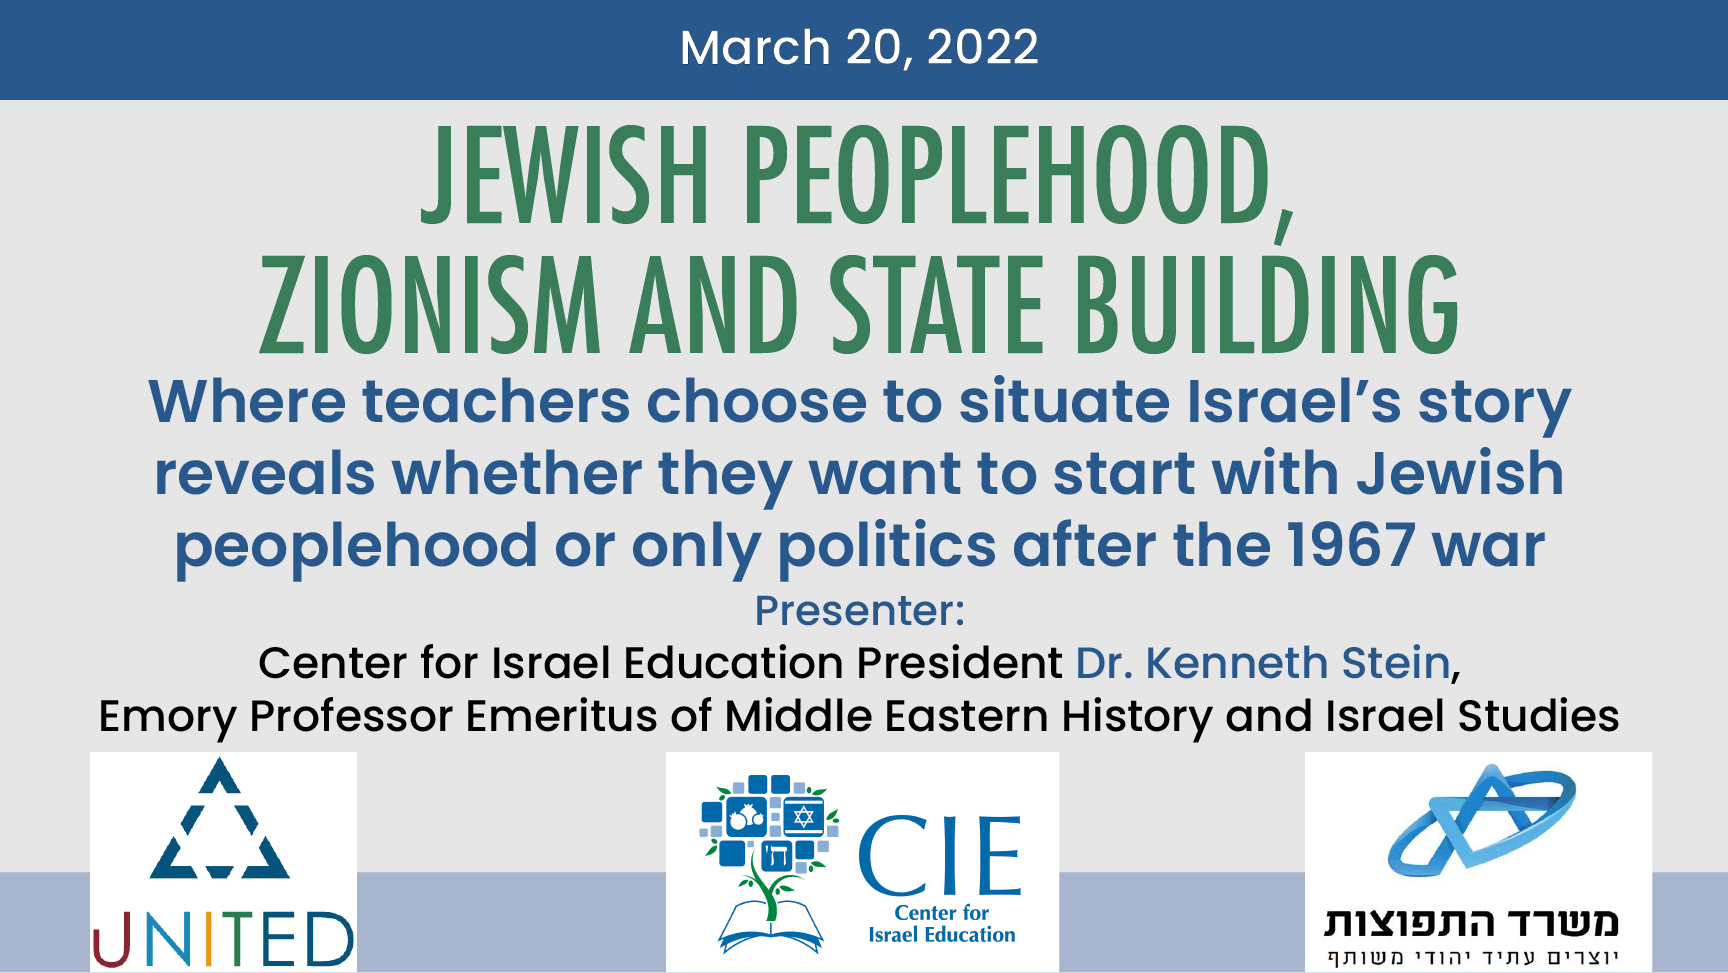 Jewish Peoplehood, Zionism and State Building